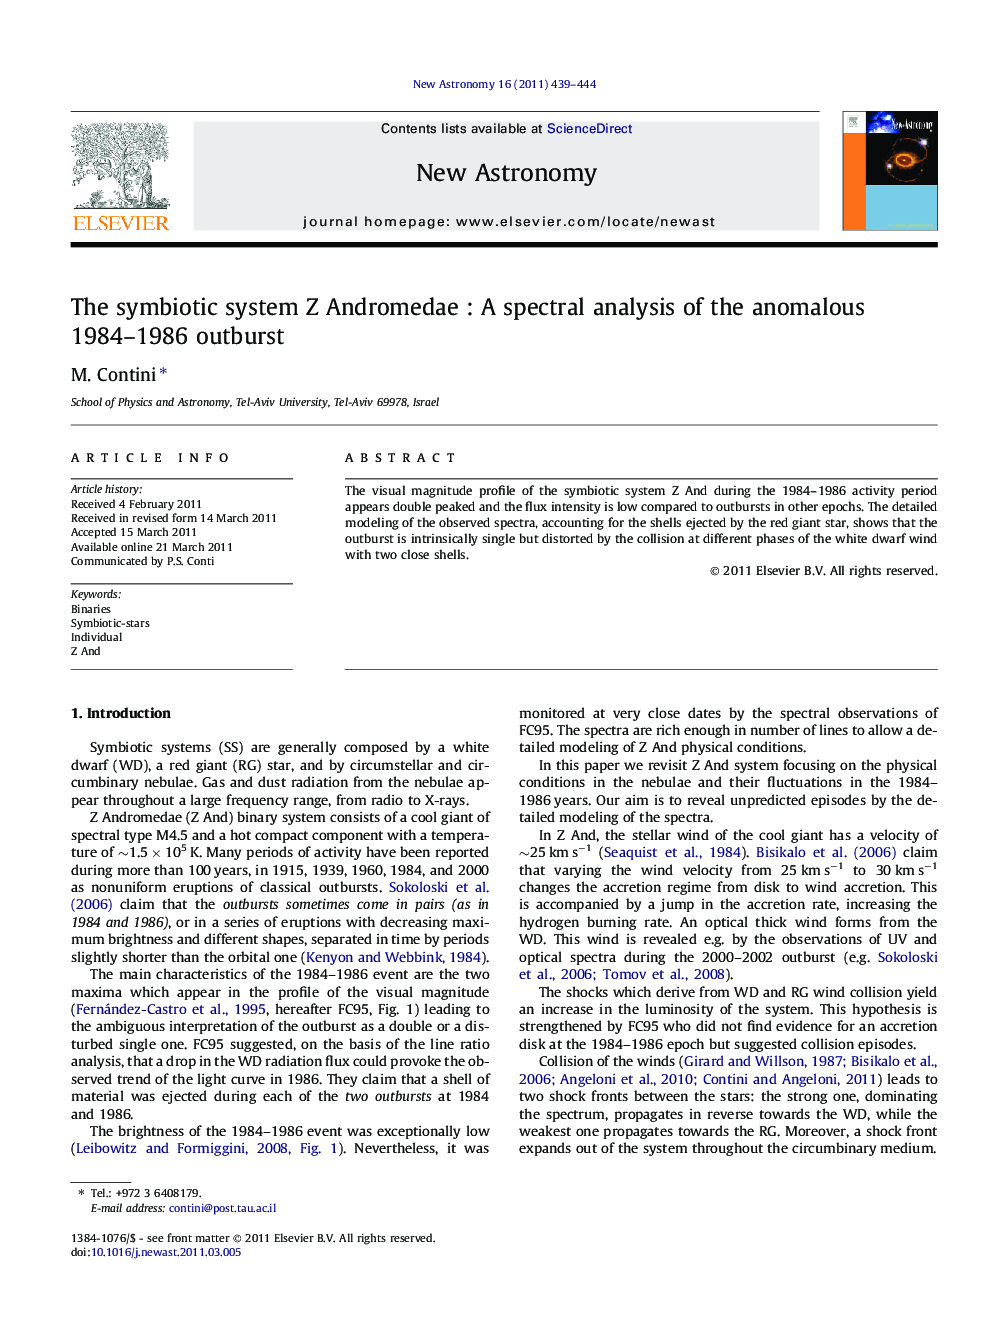 The symbiotic system Z Andromedae : A spectral analysis of the anomalous 1984-1986 outburst